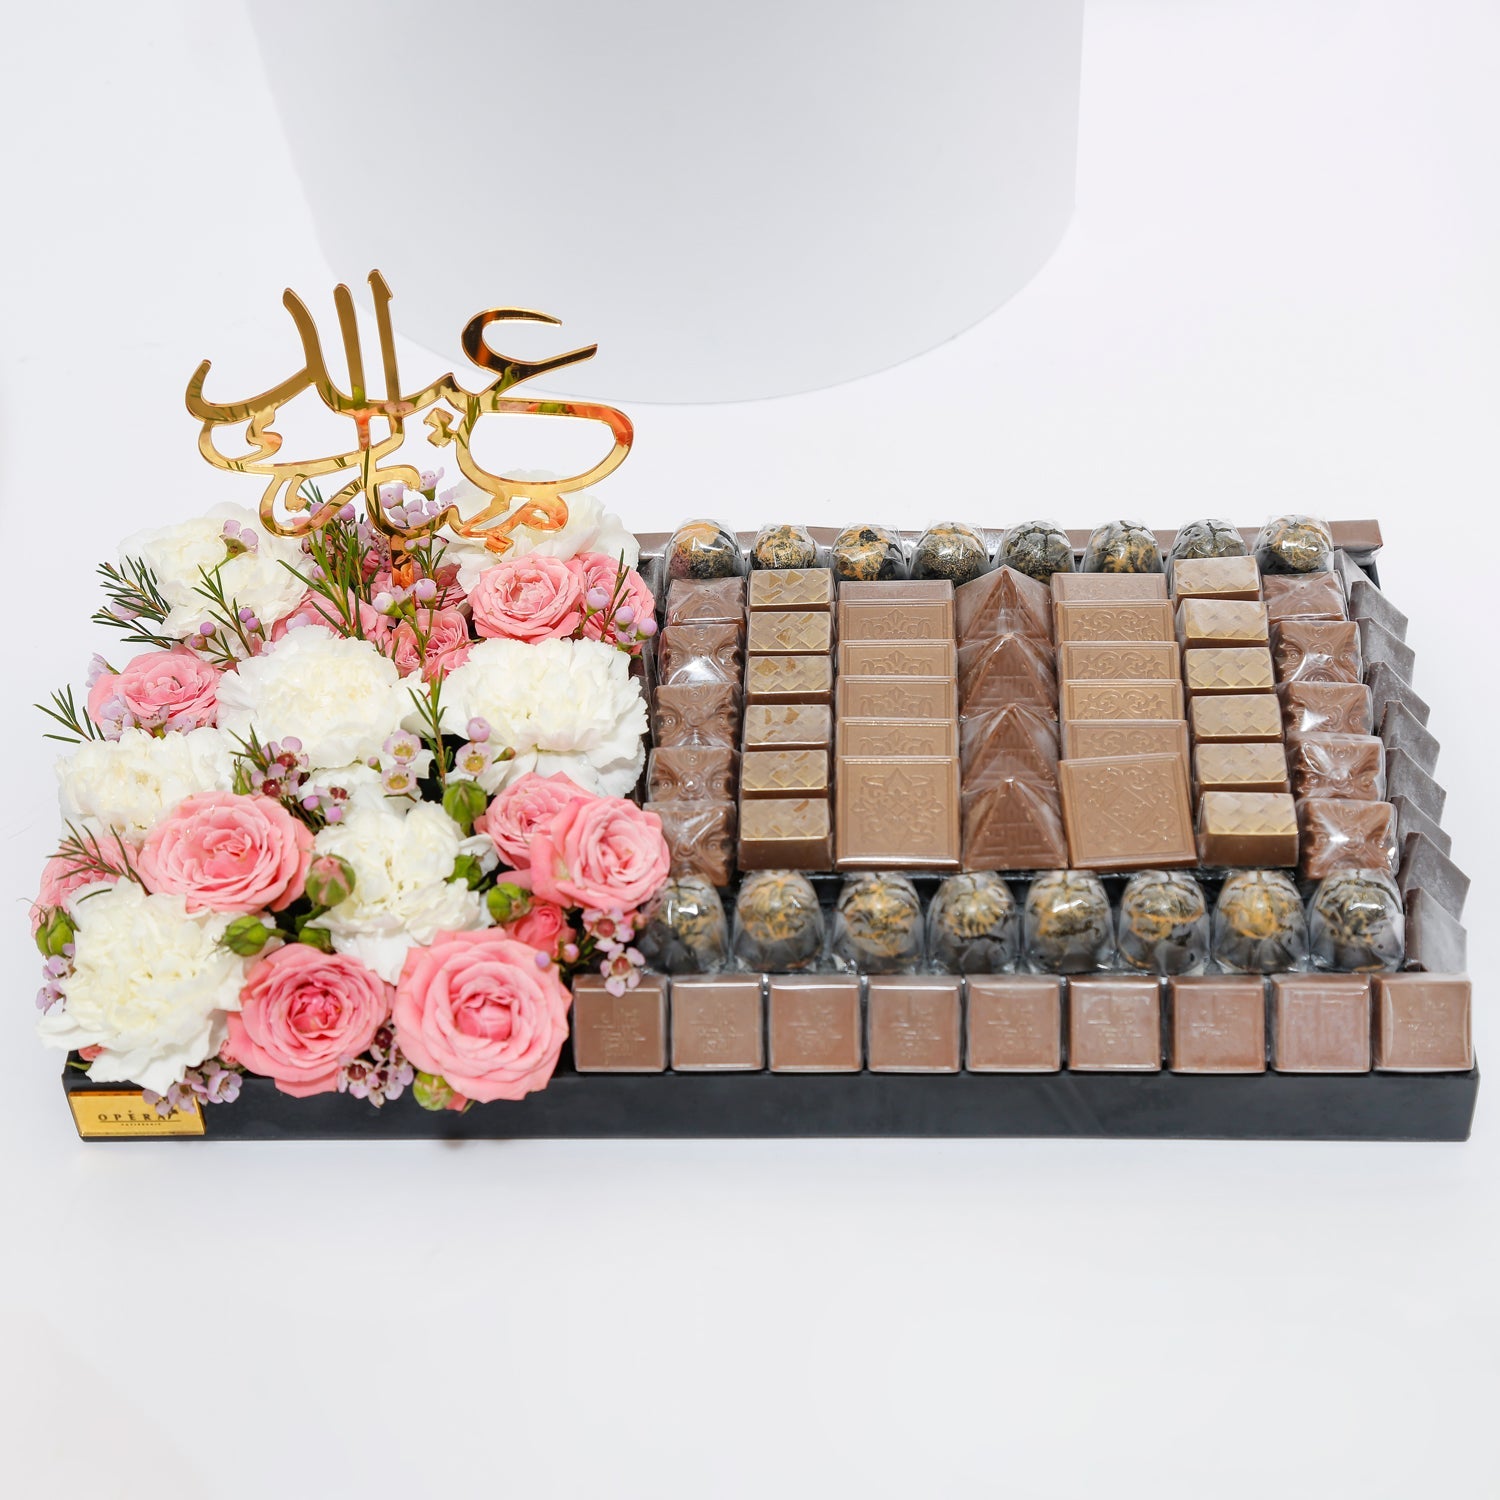 Eid Special Chocolate Tray From Opera Patisserie